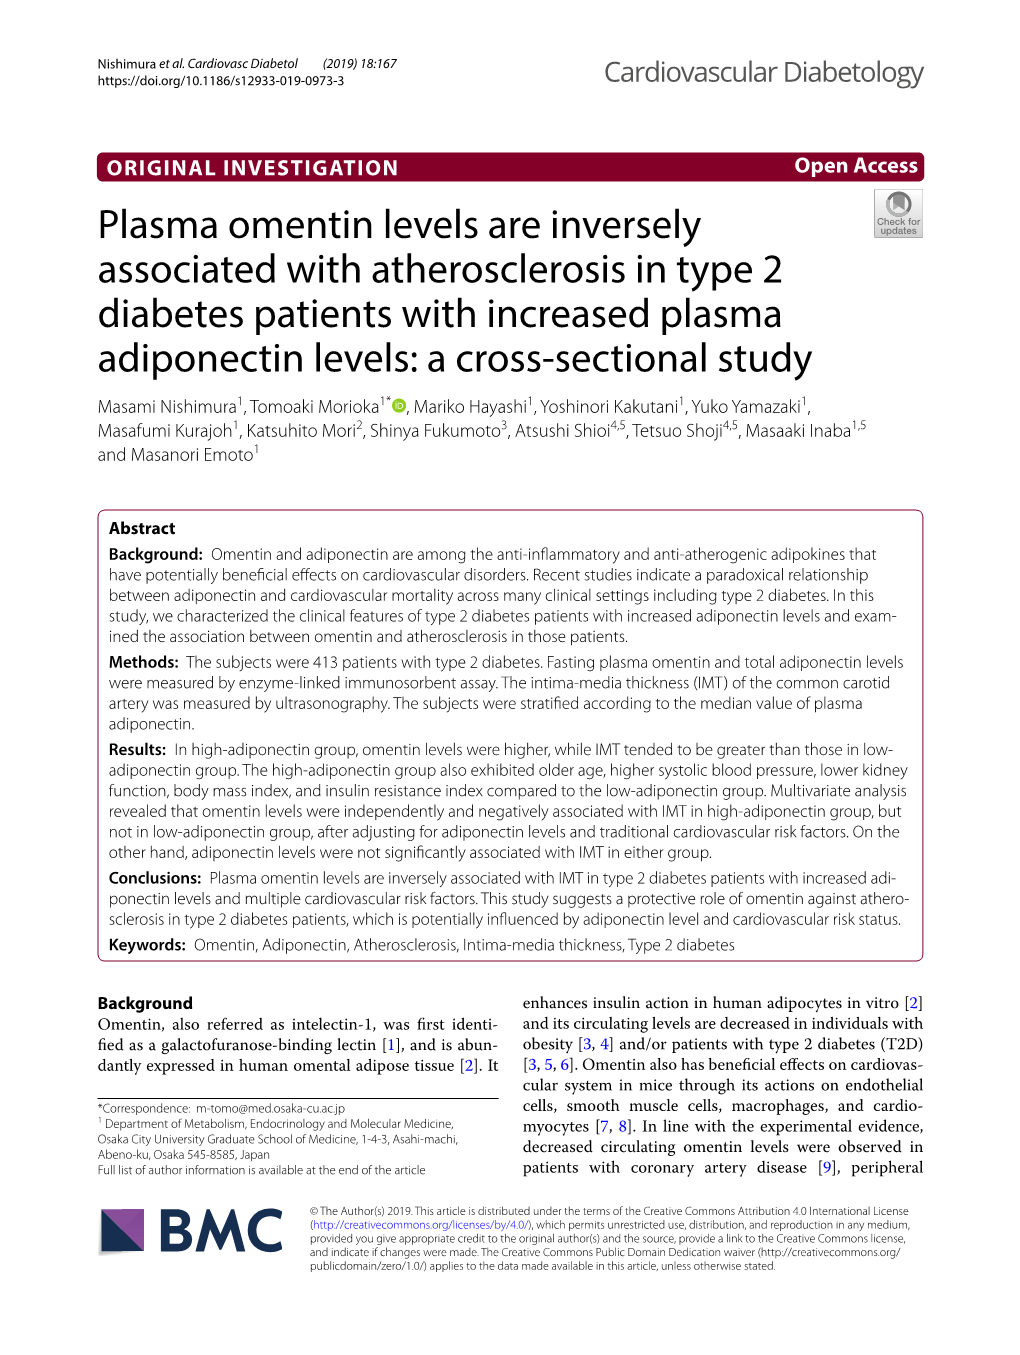 Plasma Omentin Levels Are Inversely Associated with Atherosclerosis In